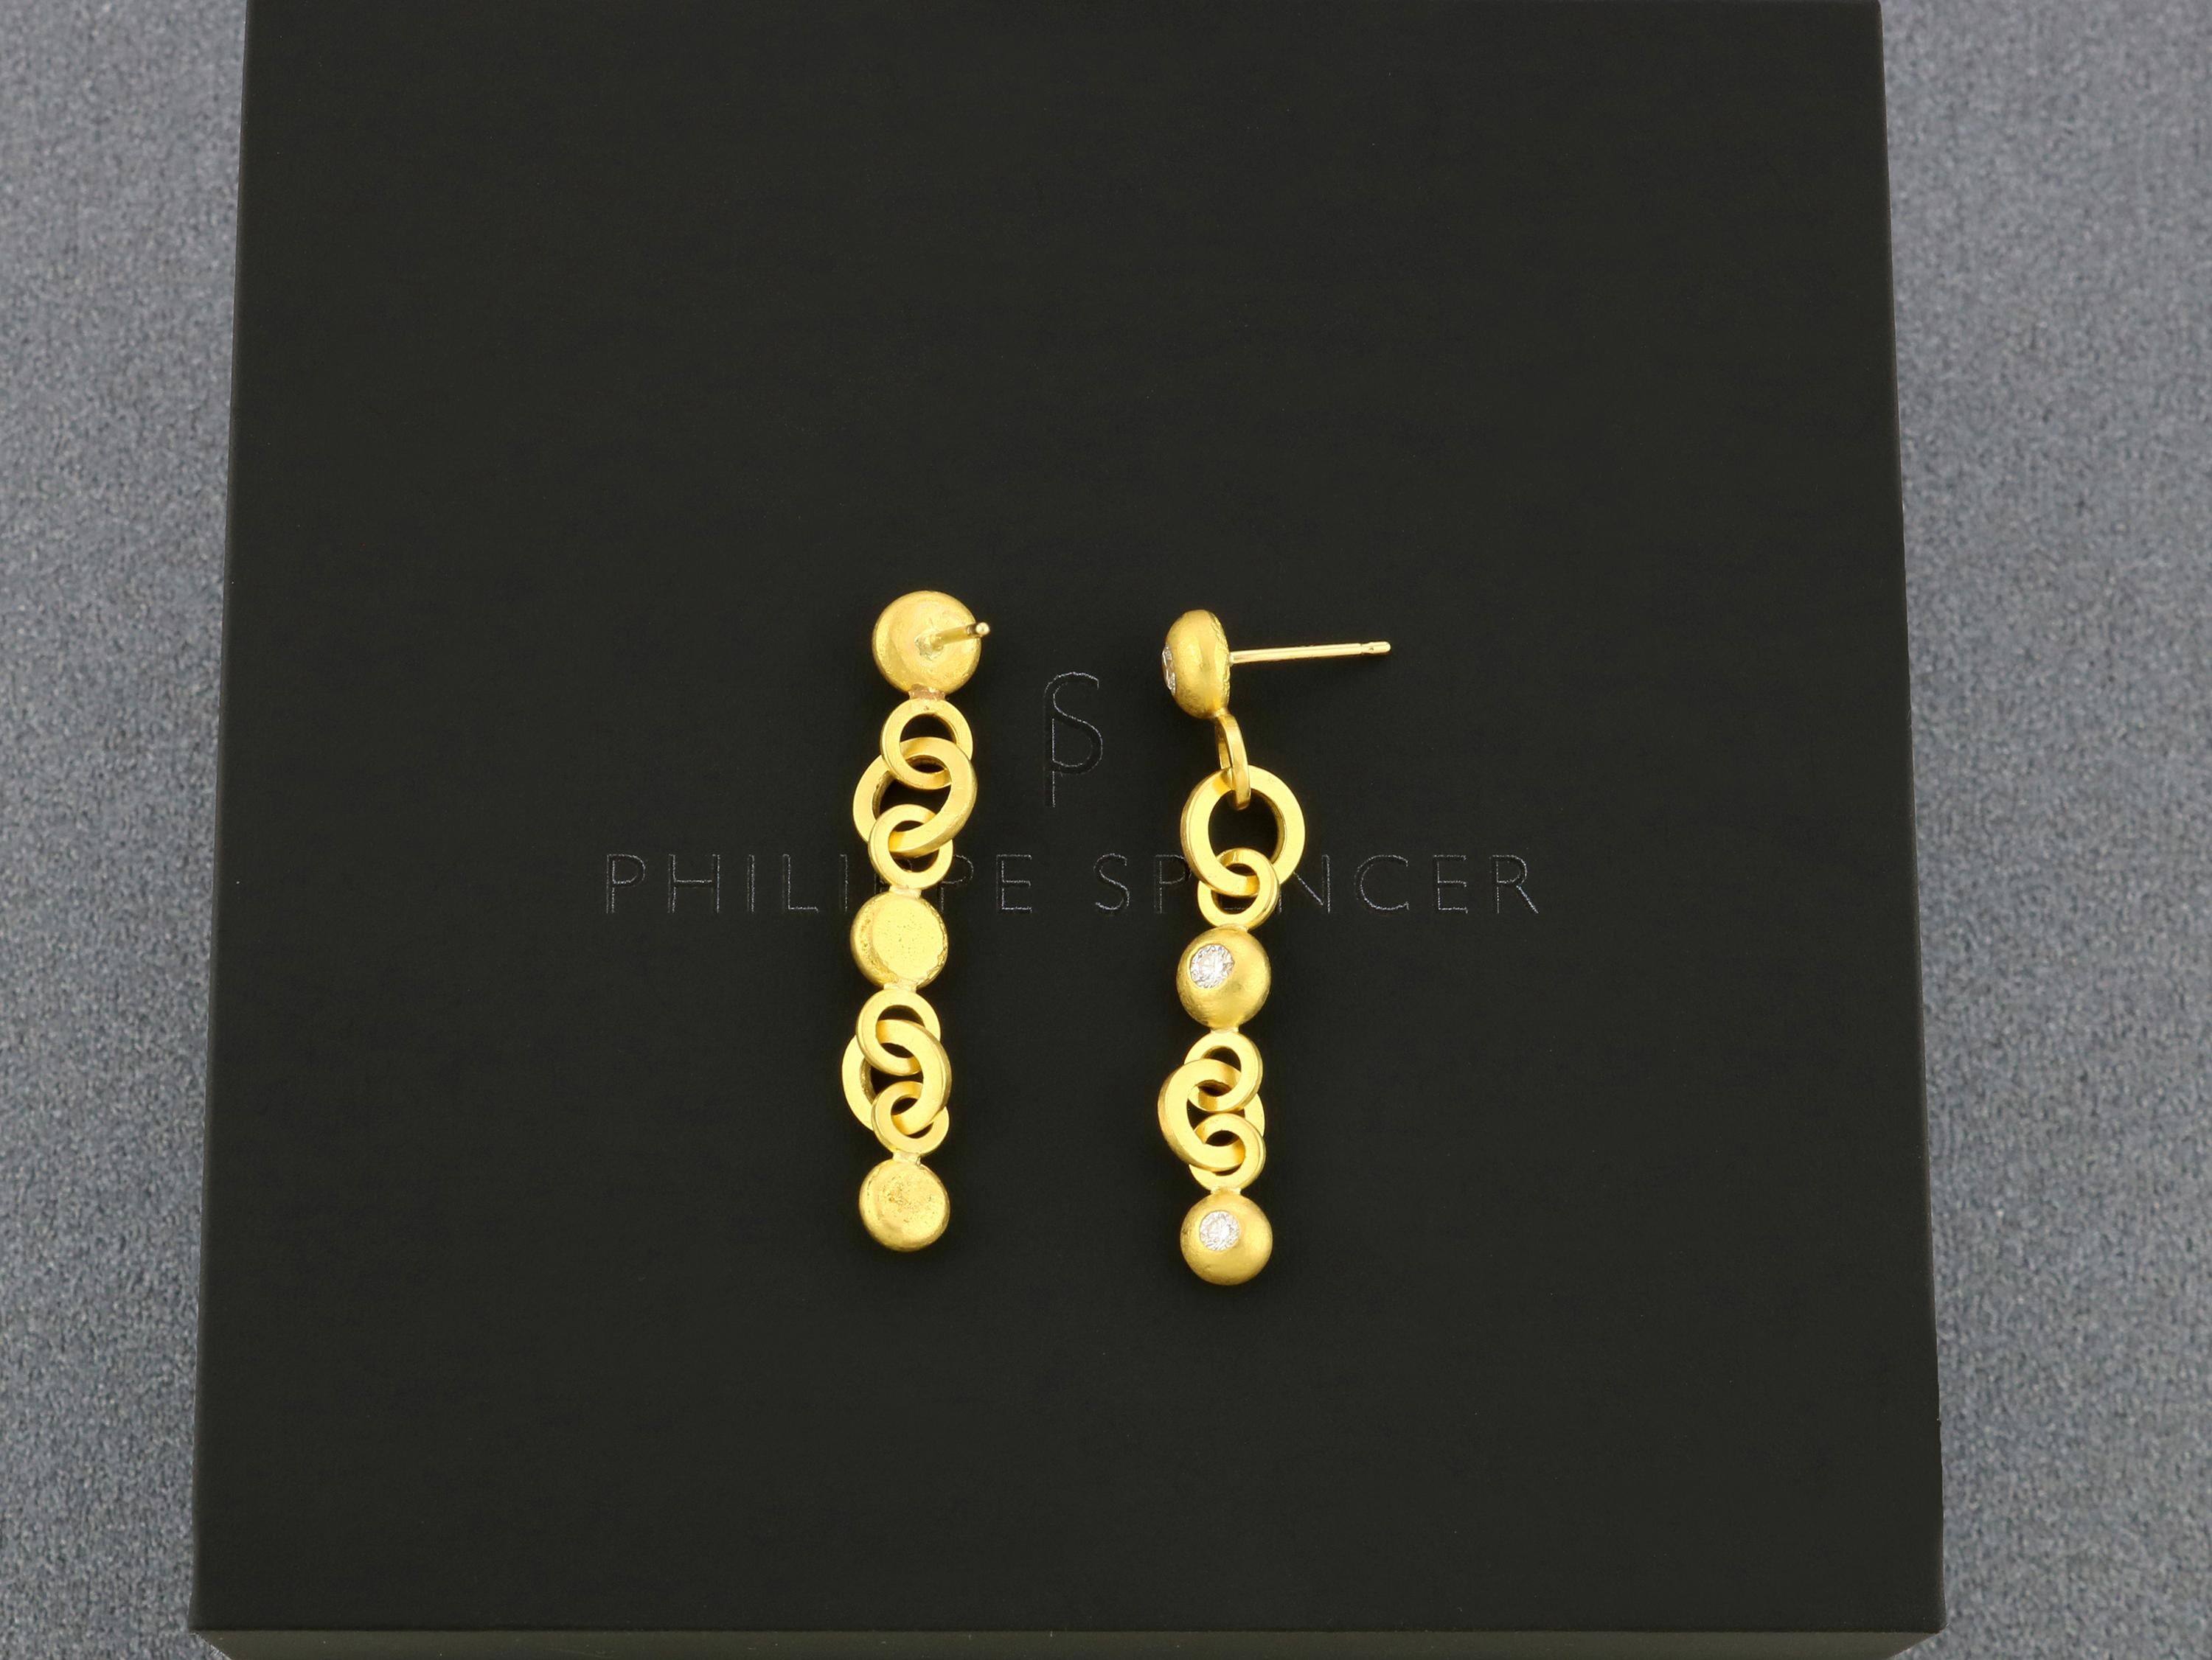 PHILIPPE SPENCER - 3/4 Ct. Total COLORLESS (D-F) Diamond Three Drop Dangling Earrings set in Pure 20K Gold, with Solid 20K Gold connection links. Each pair is a unique, authentically smithed One-Of-A-Kind work of art. 

These beautiful Hand-Forged